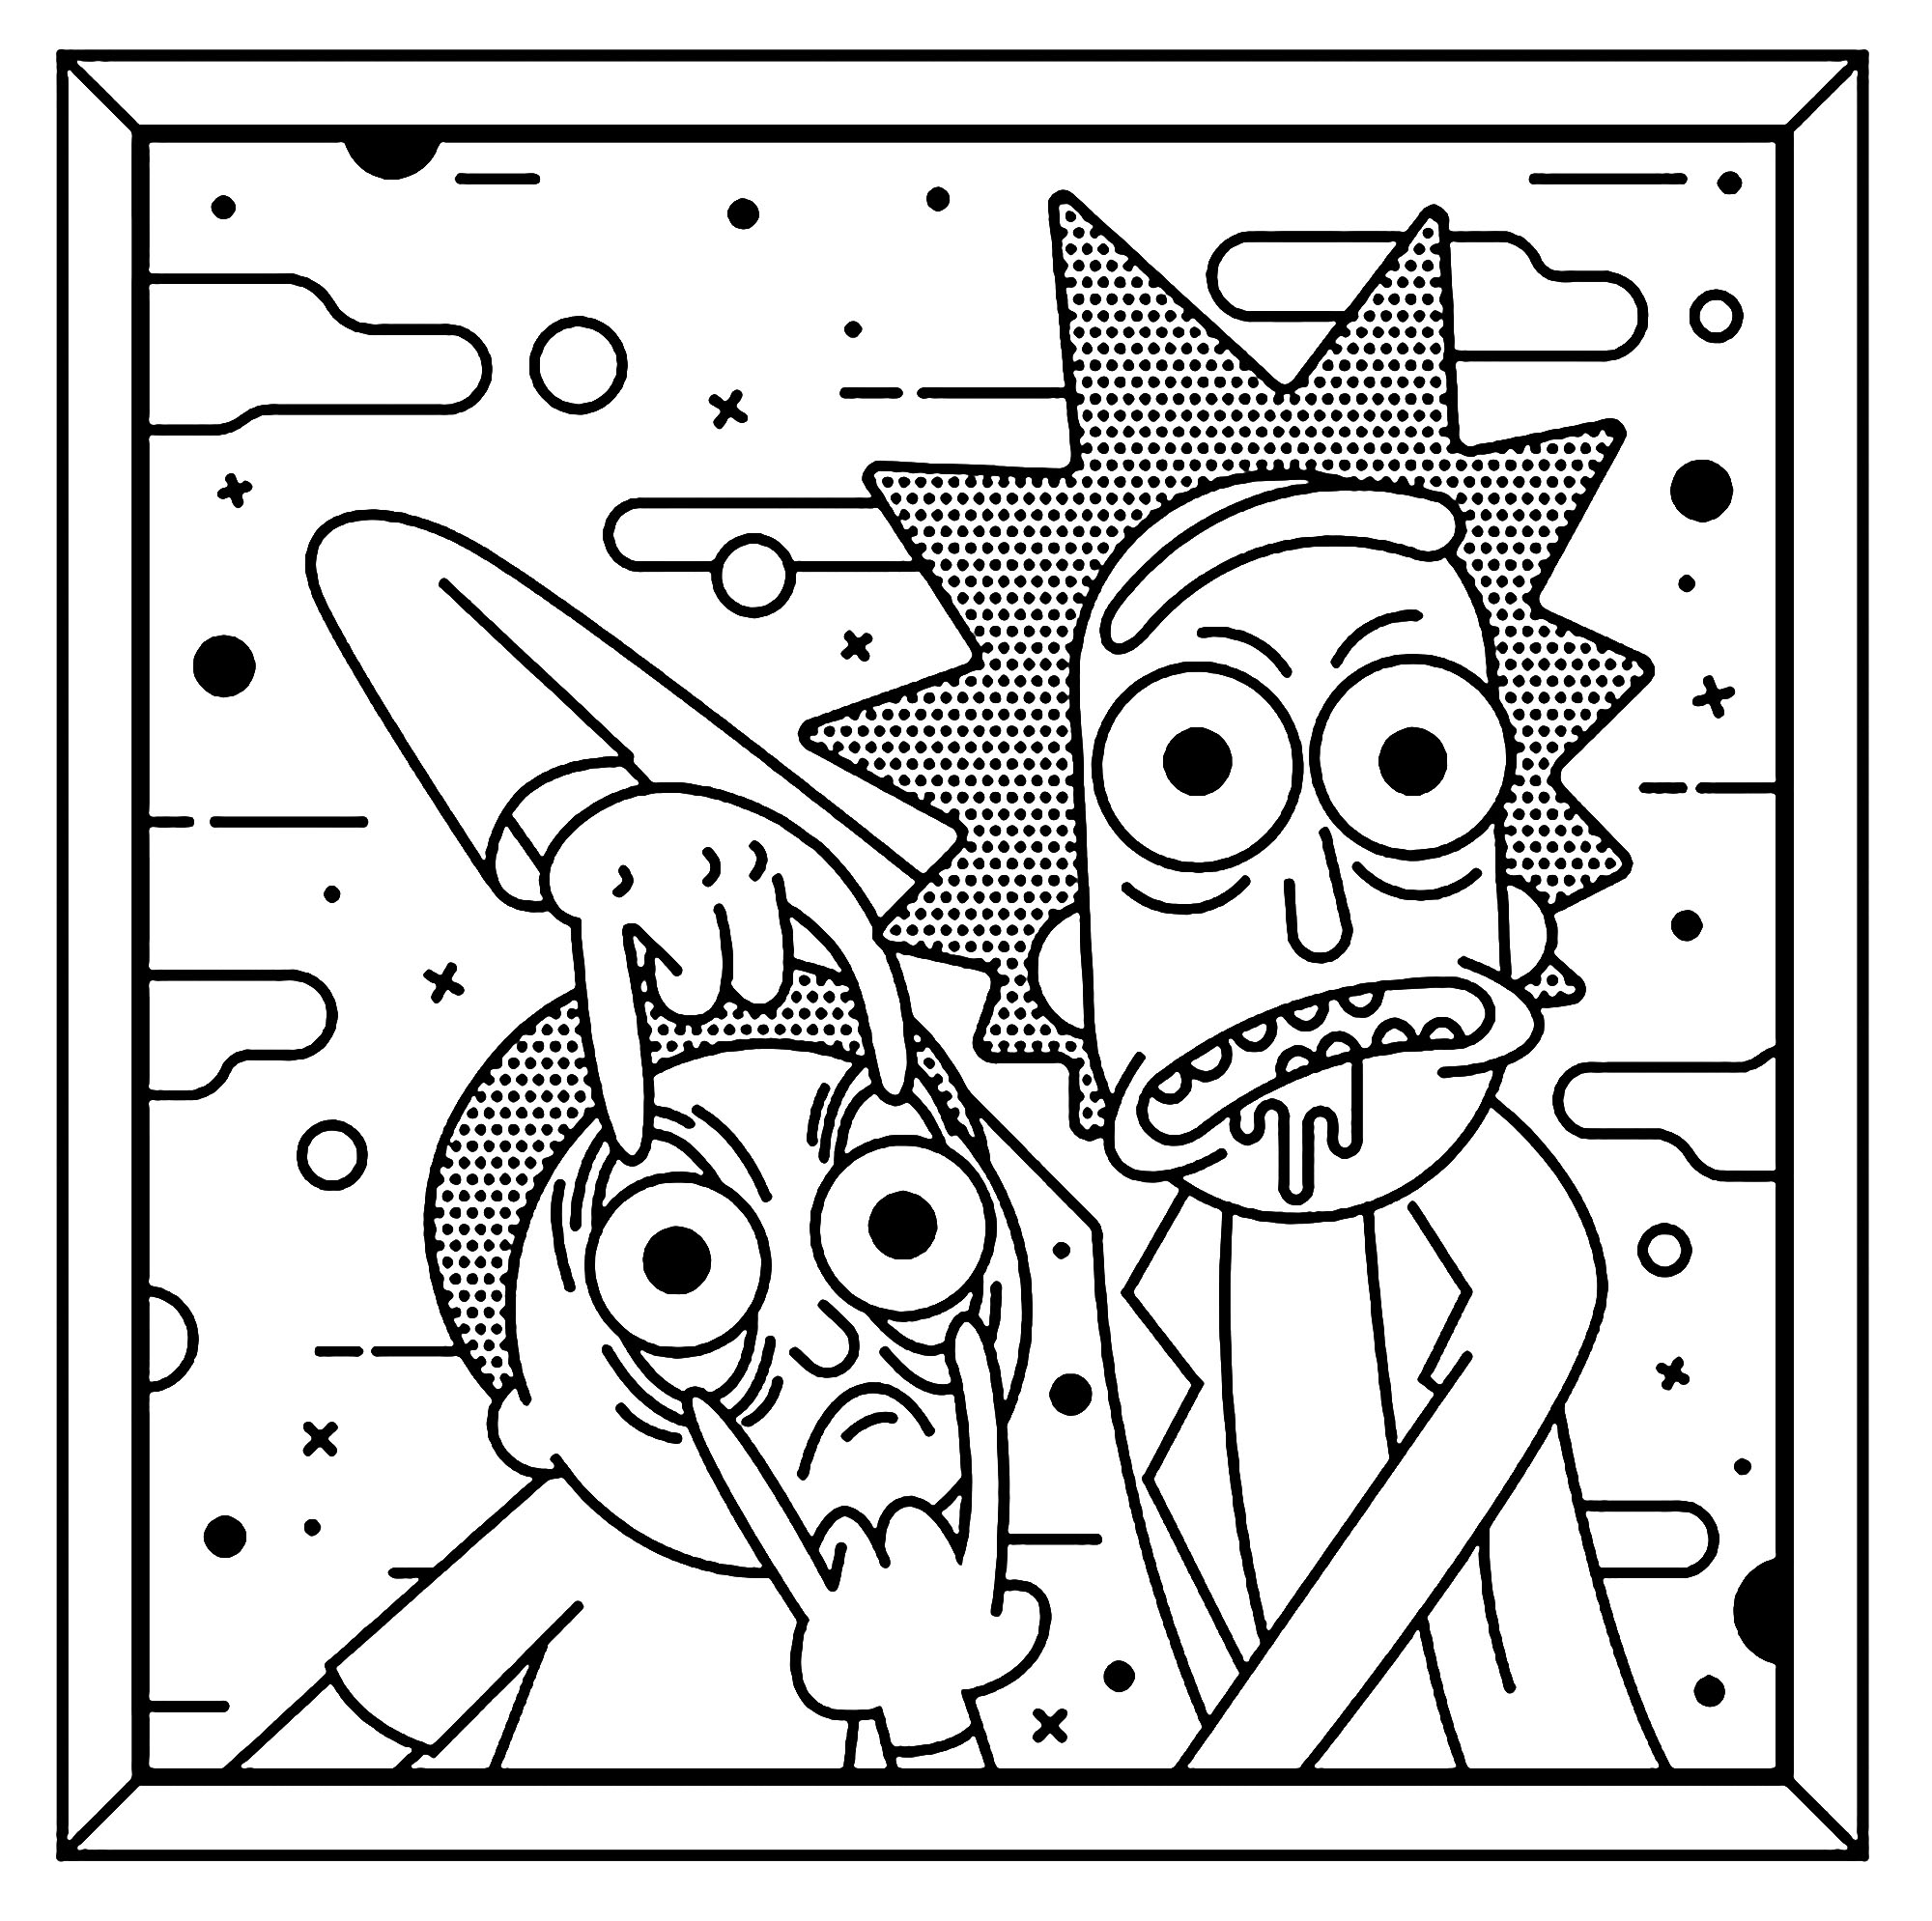 Do you like Pop Art?. The two main characters, Rick and Morty, are portrayed in a very characteristic Roy Lichtenstein style.